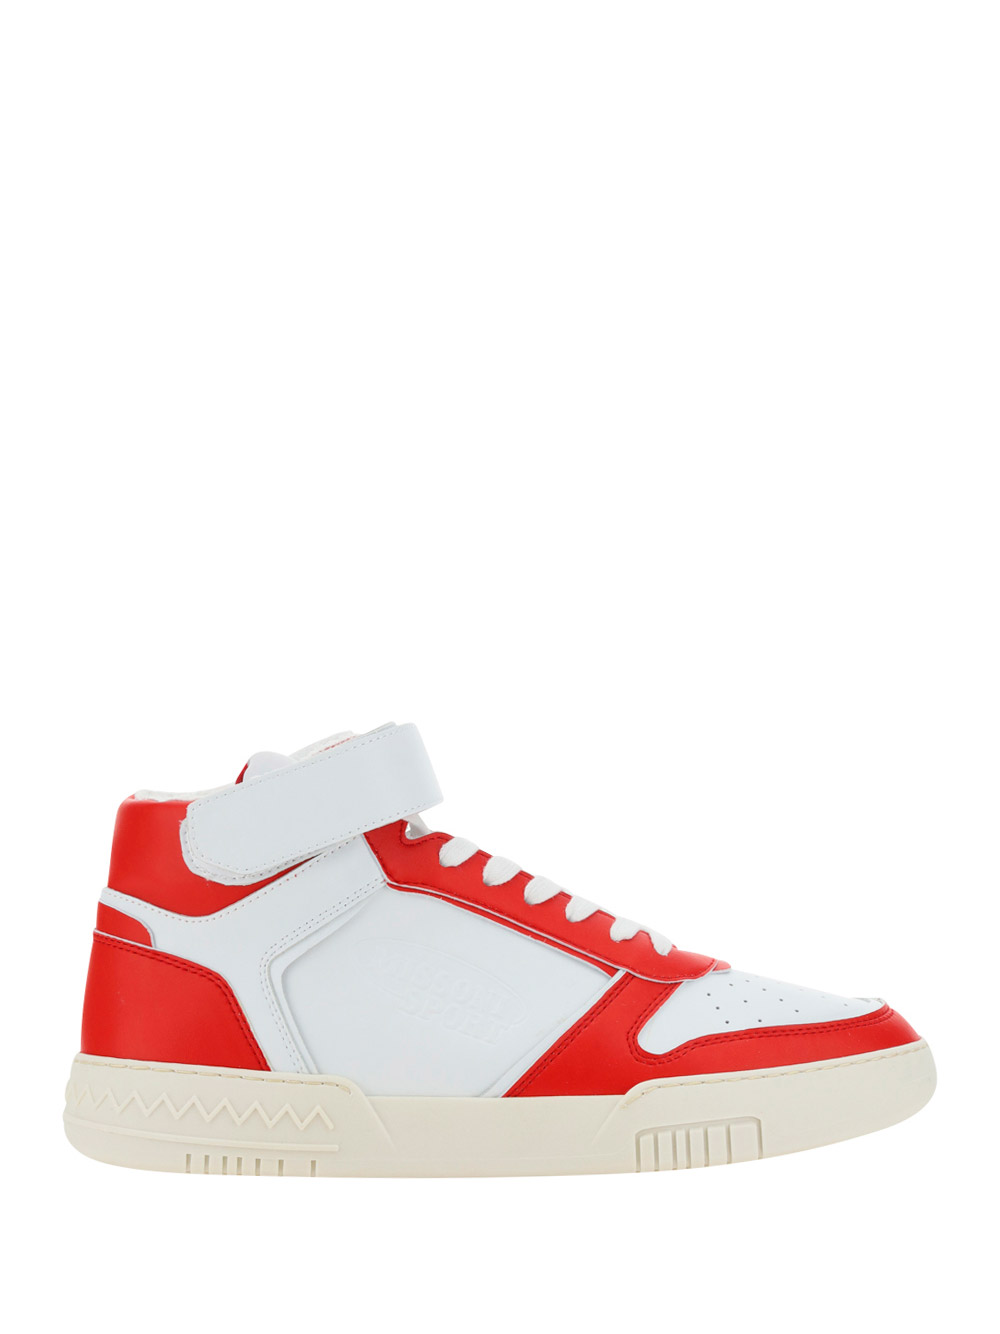 Acbc X Missoni Sneakers In Red/white